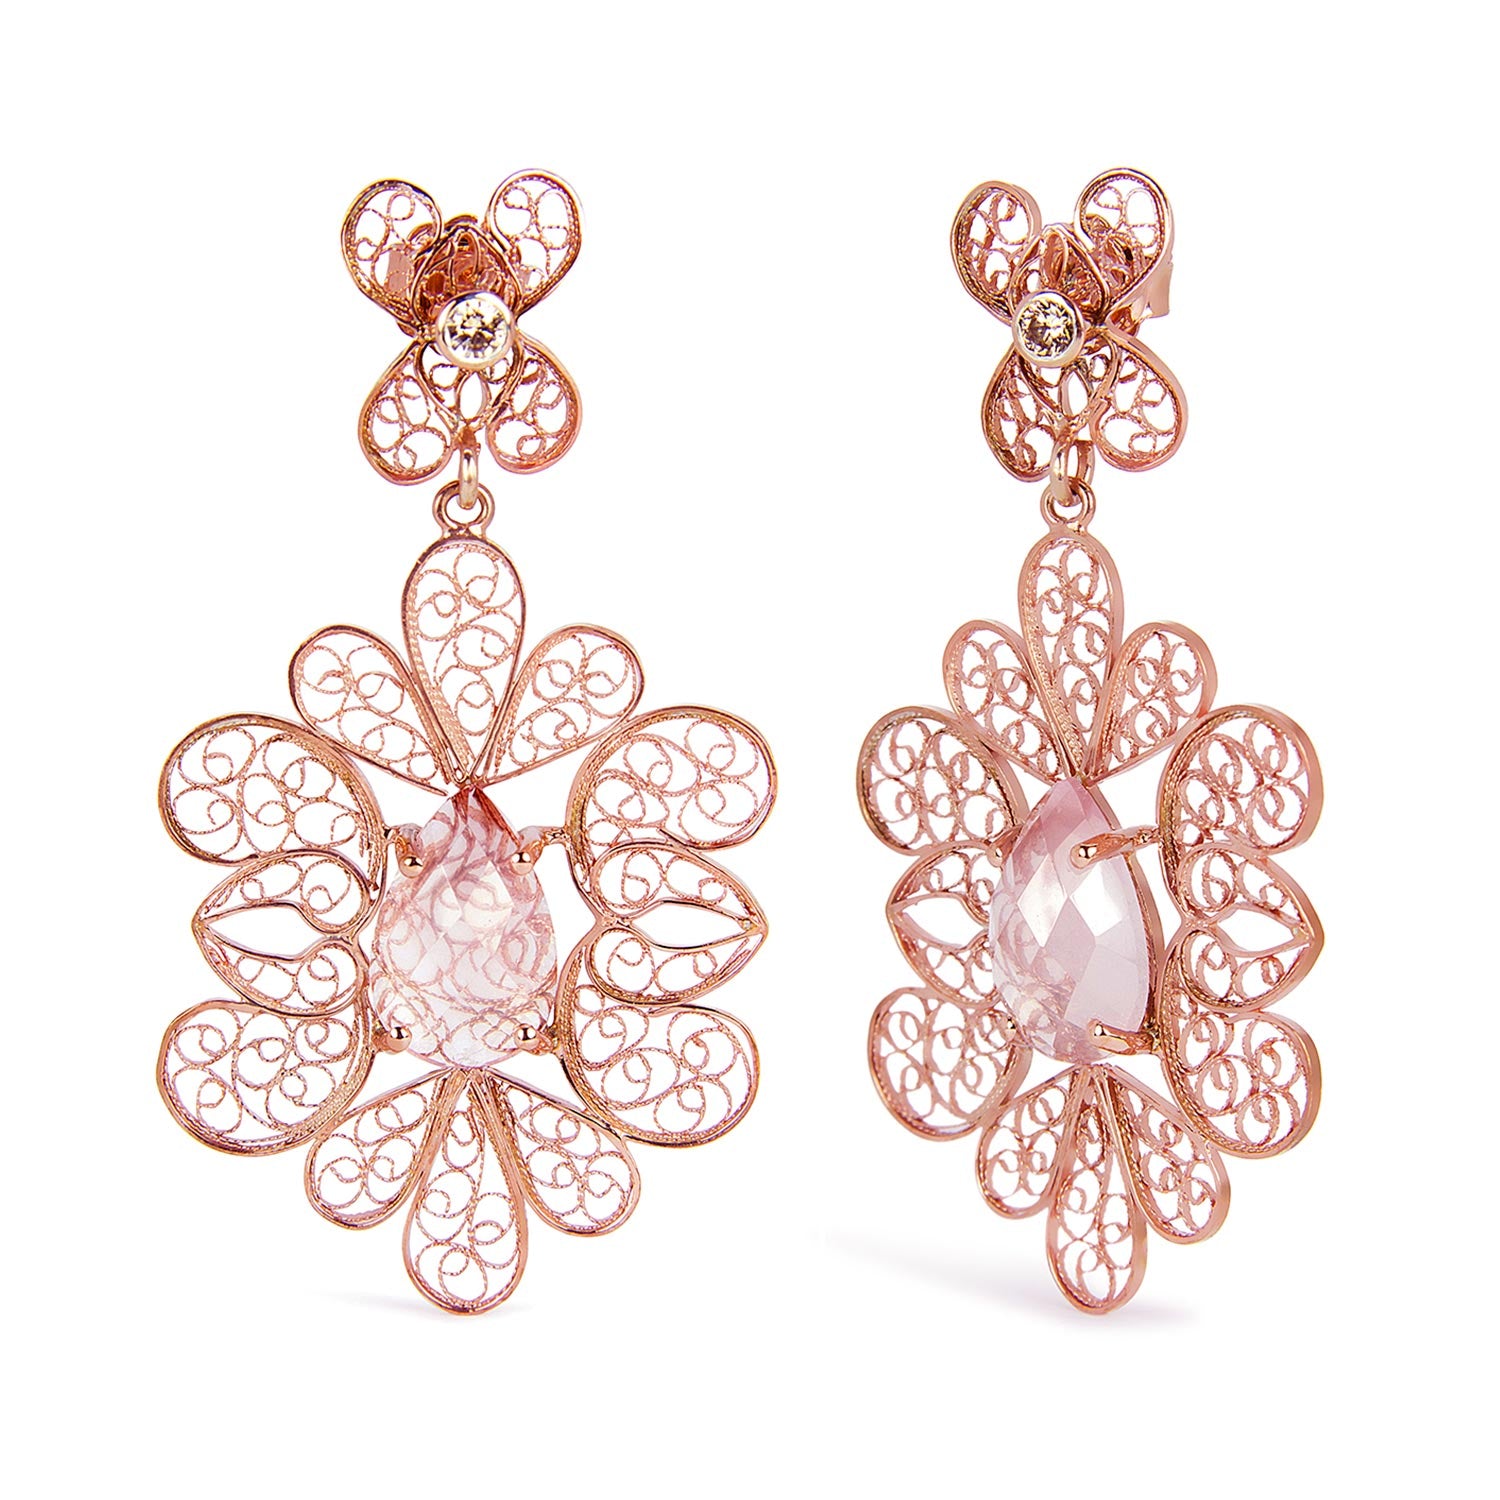 Bespoke filigree earrings - recycled silver and rose gold, conflict-free champagne diamonds and faceted rose quartz